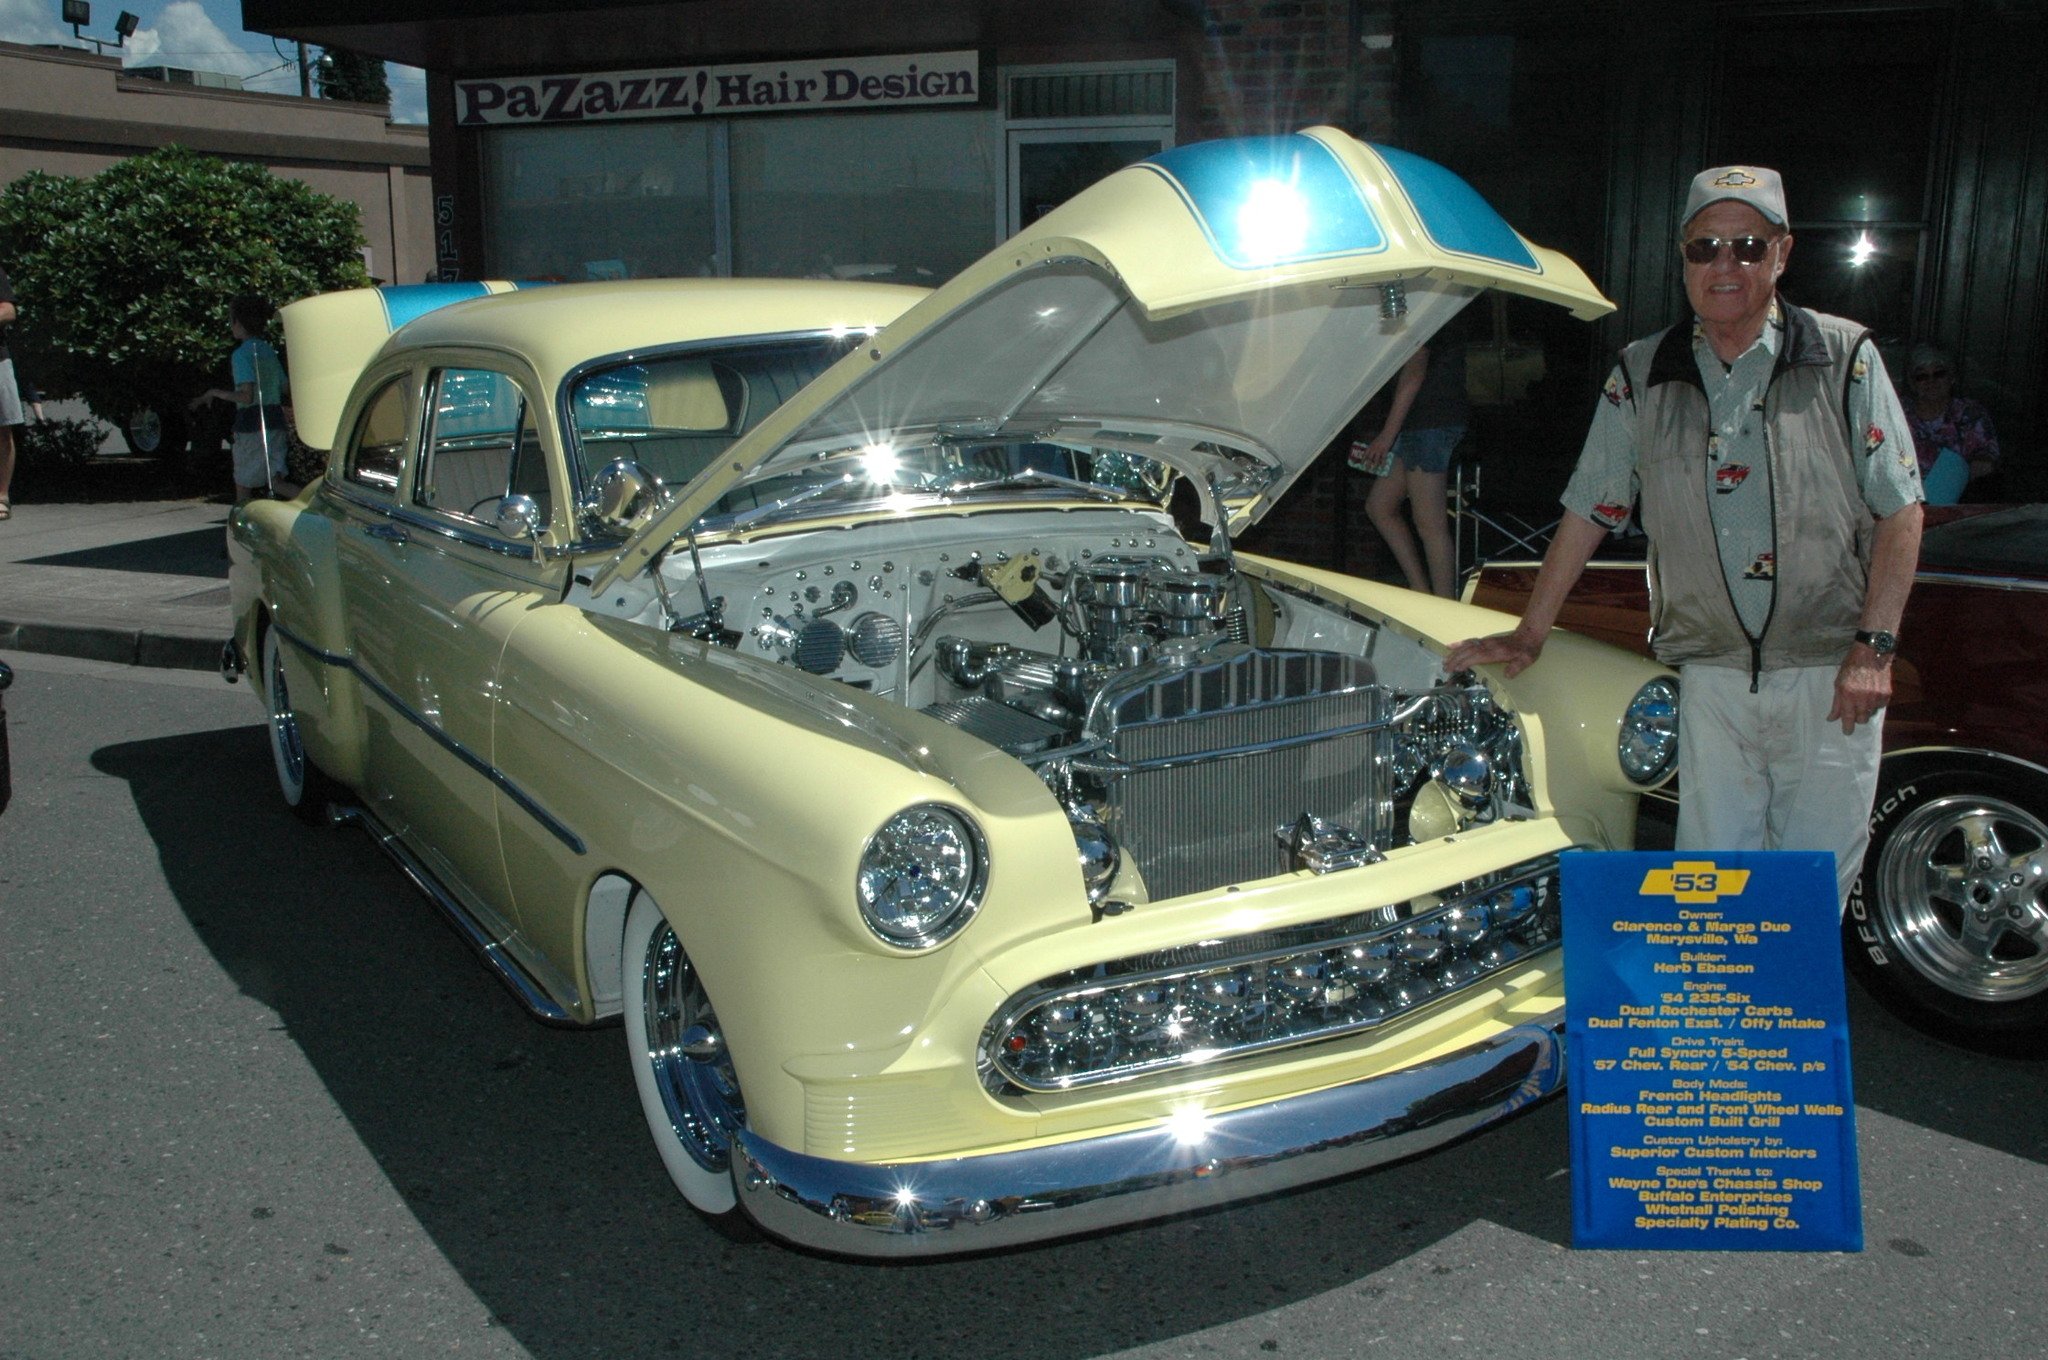 Kirk Boxleitner/Staff PhotoMarysville’s Clarence Due shows off his 1950s-era Chevrolet